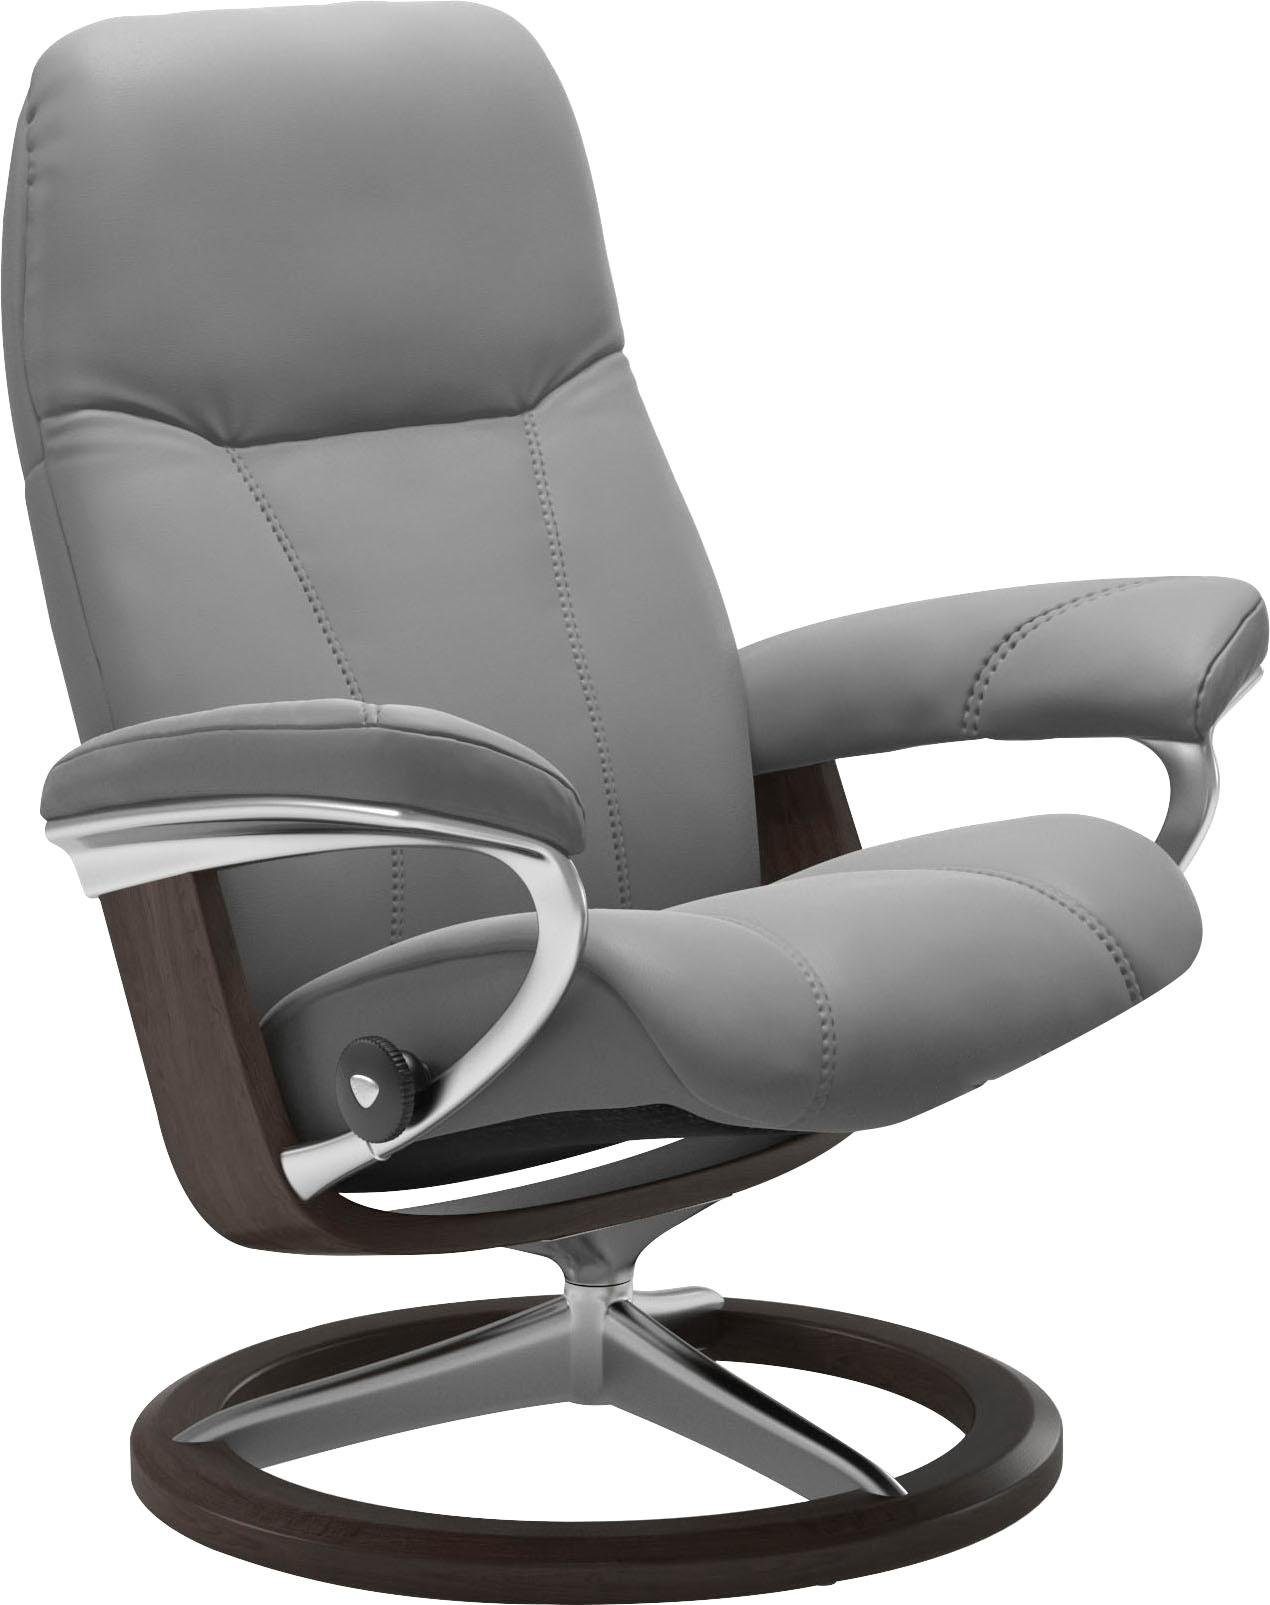 S, Stressless® Gestell Signature mit Base, Größe Wenge Consul, Relaxsessel